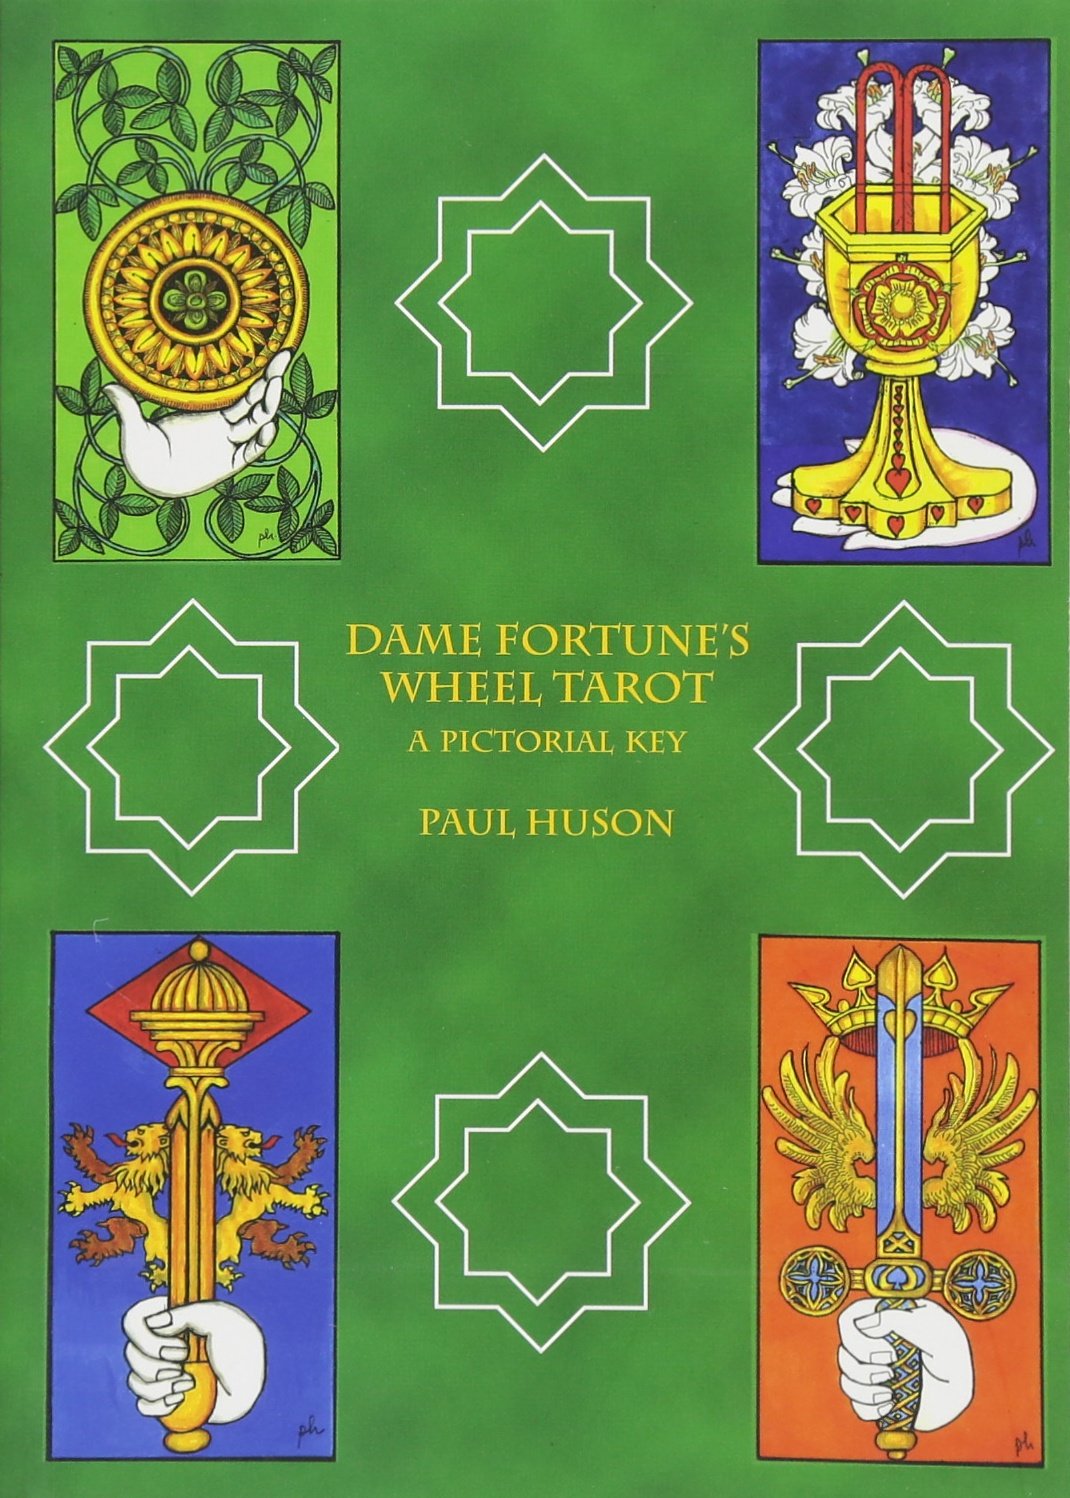 Dame Fortune's Wheel Tarot: A Pictorial Key by Paul Huson